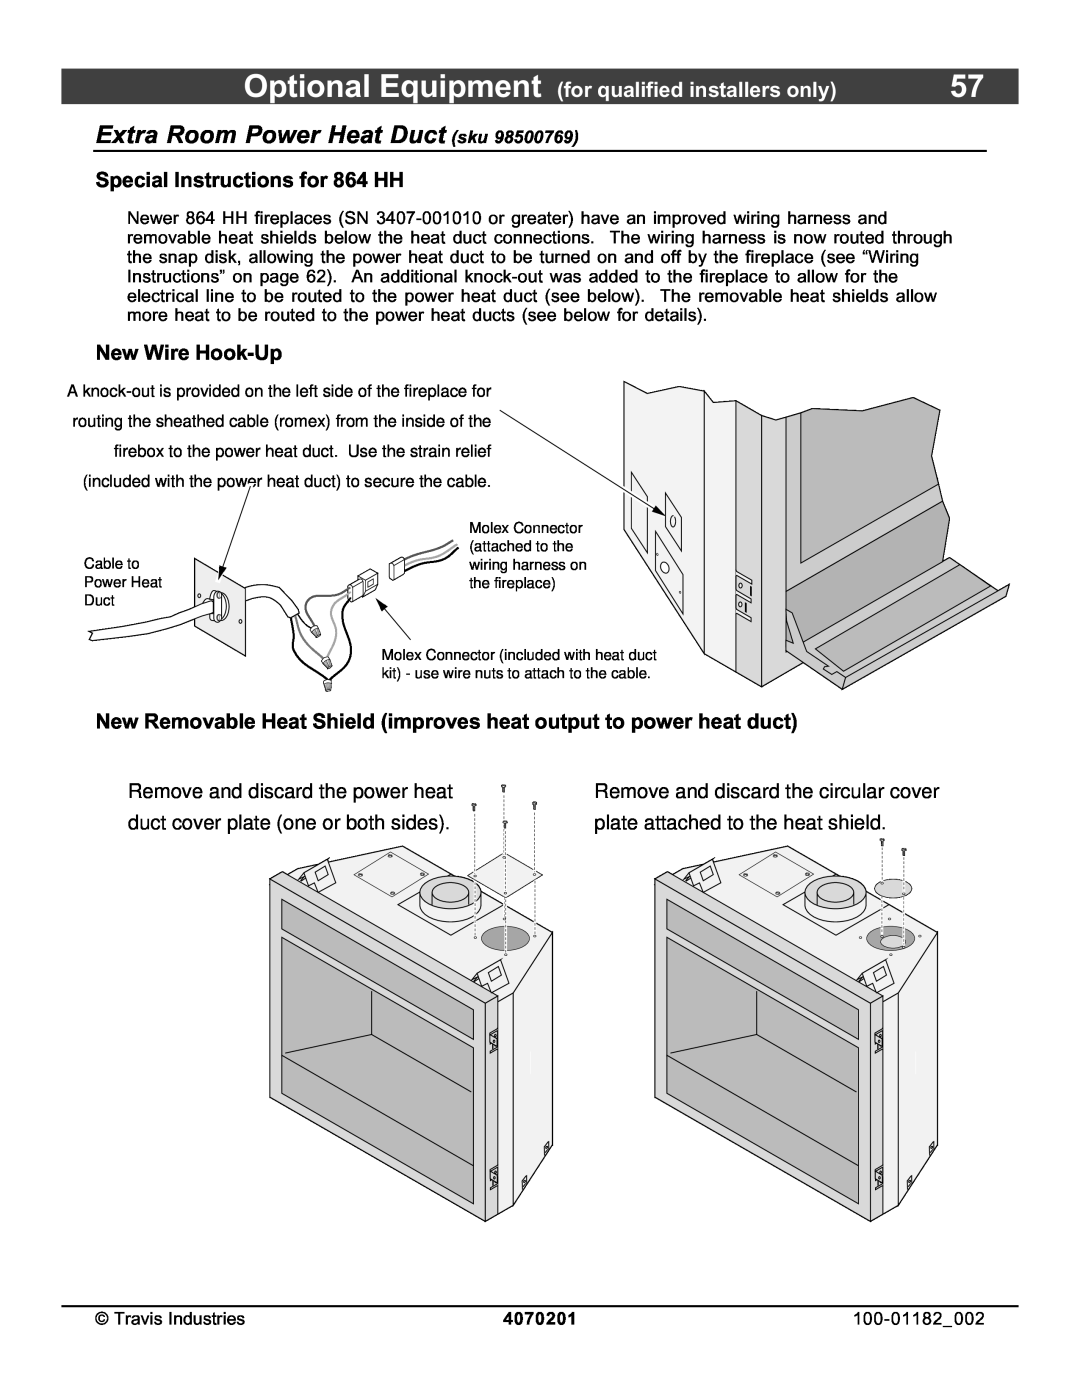 North Star Extra Room Power Heat Duct sku, Special Instructions for 864 HH, New Wire Hook-Up, 4070201 